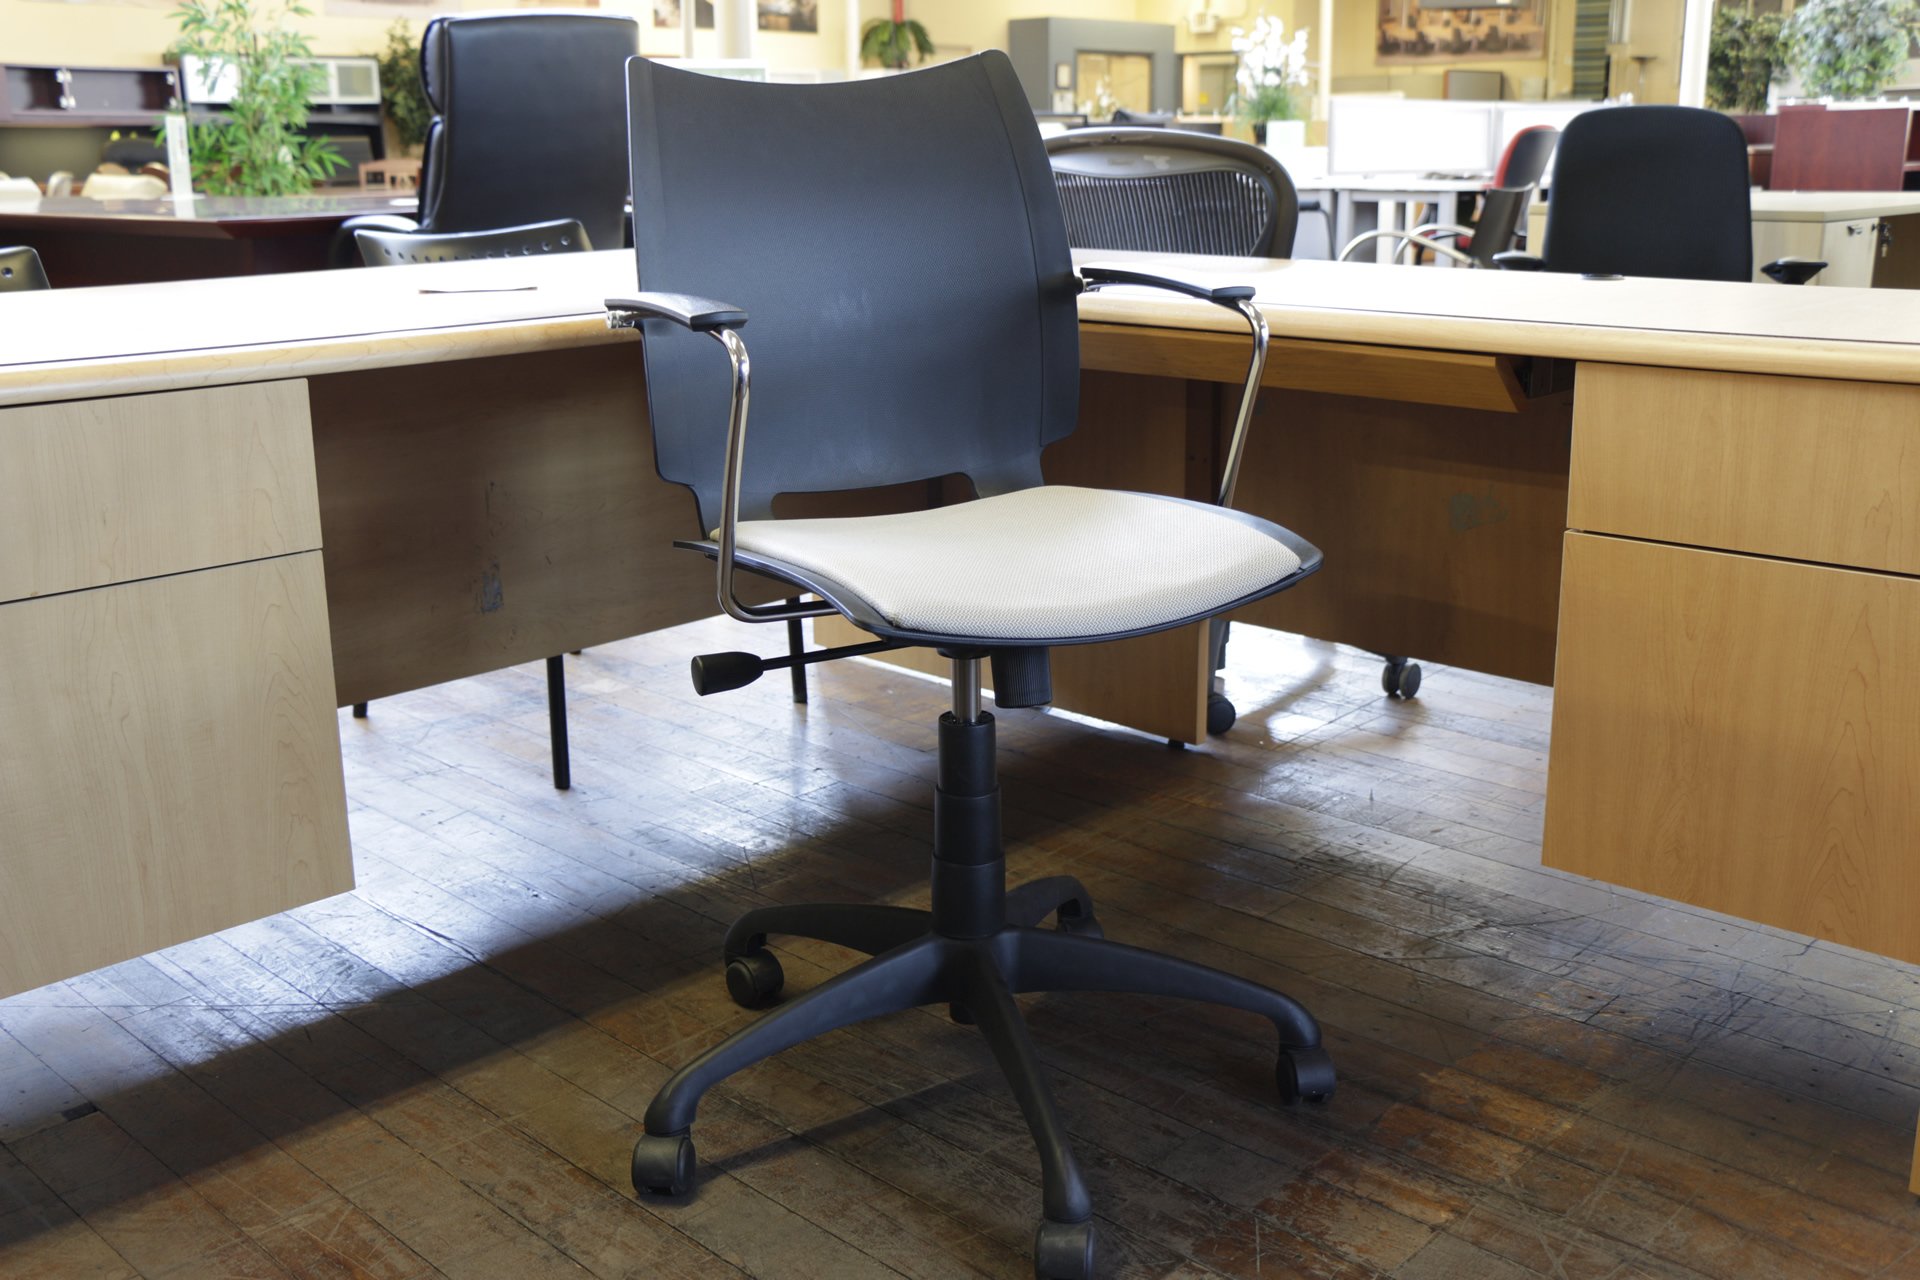 Source International “iSwivel” Chairs (Used)